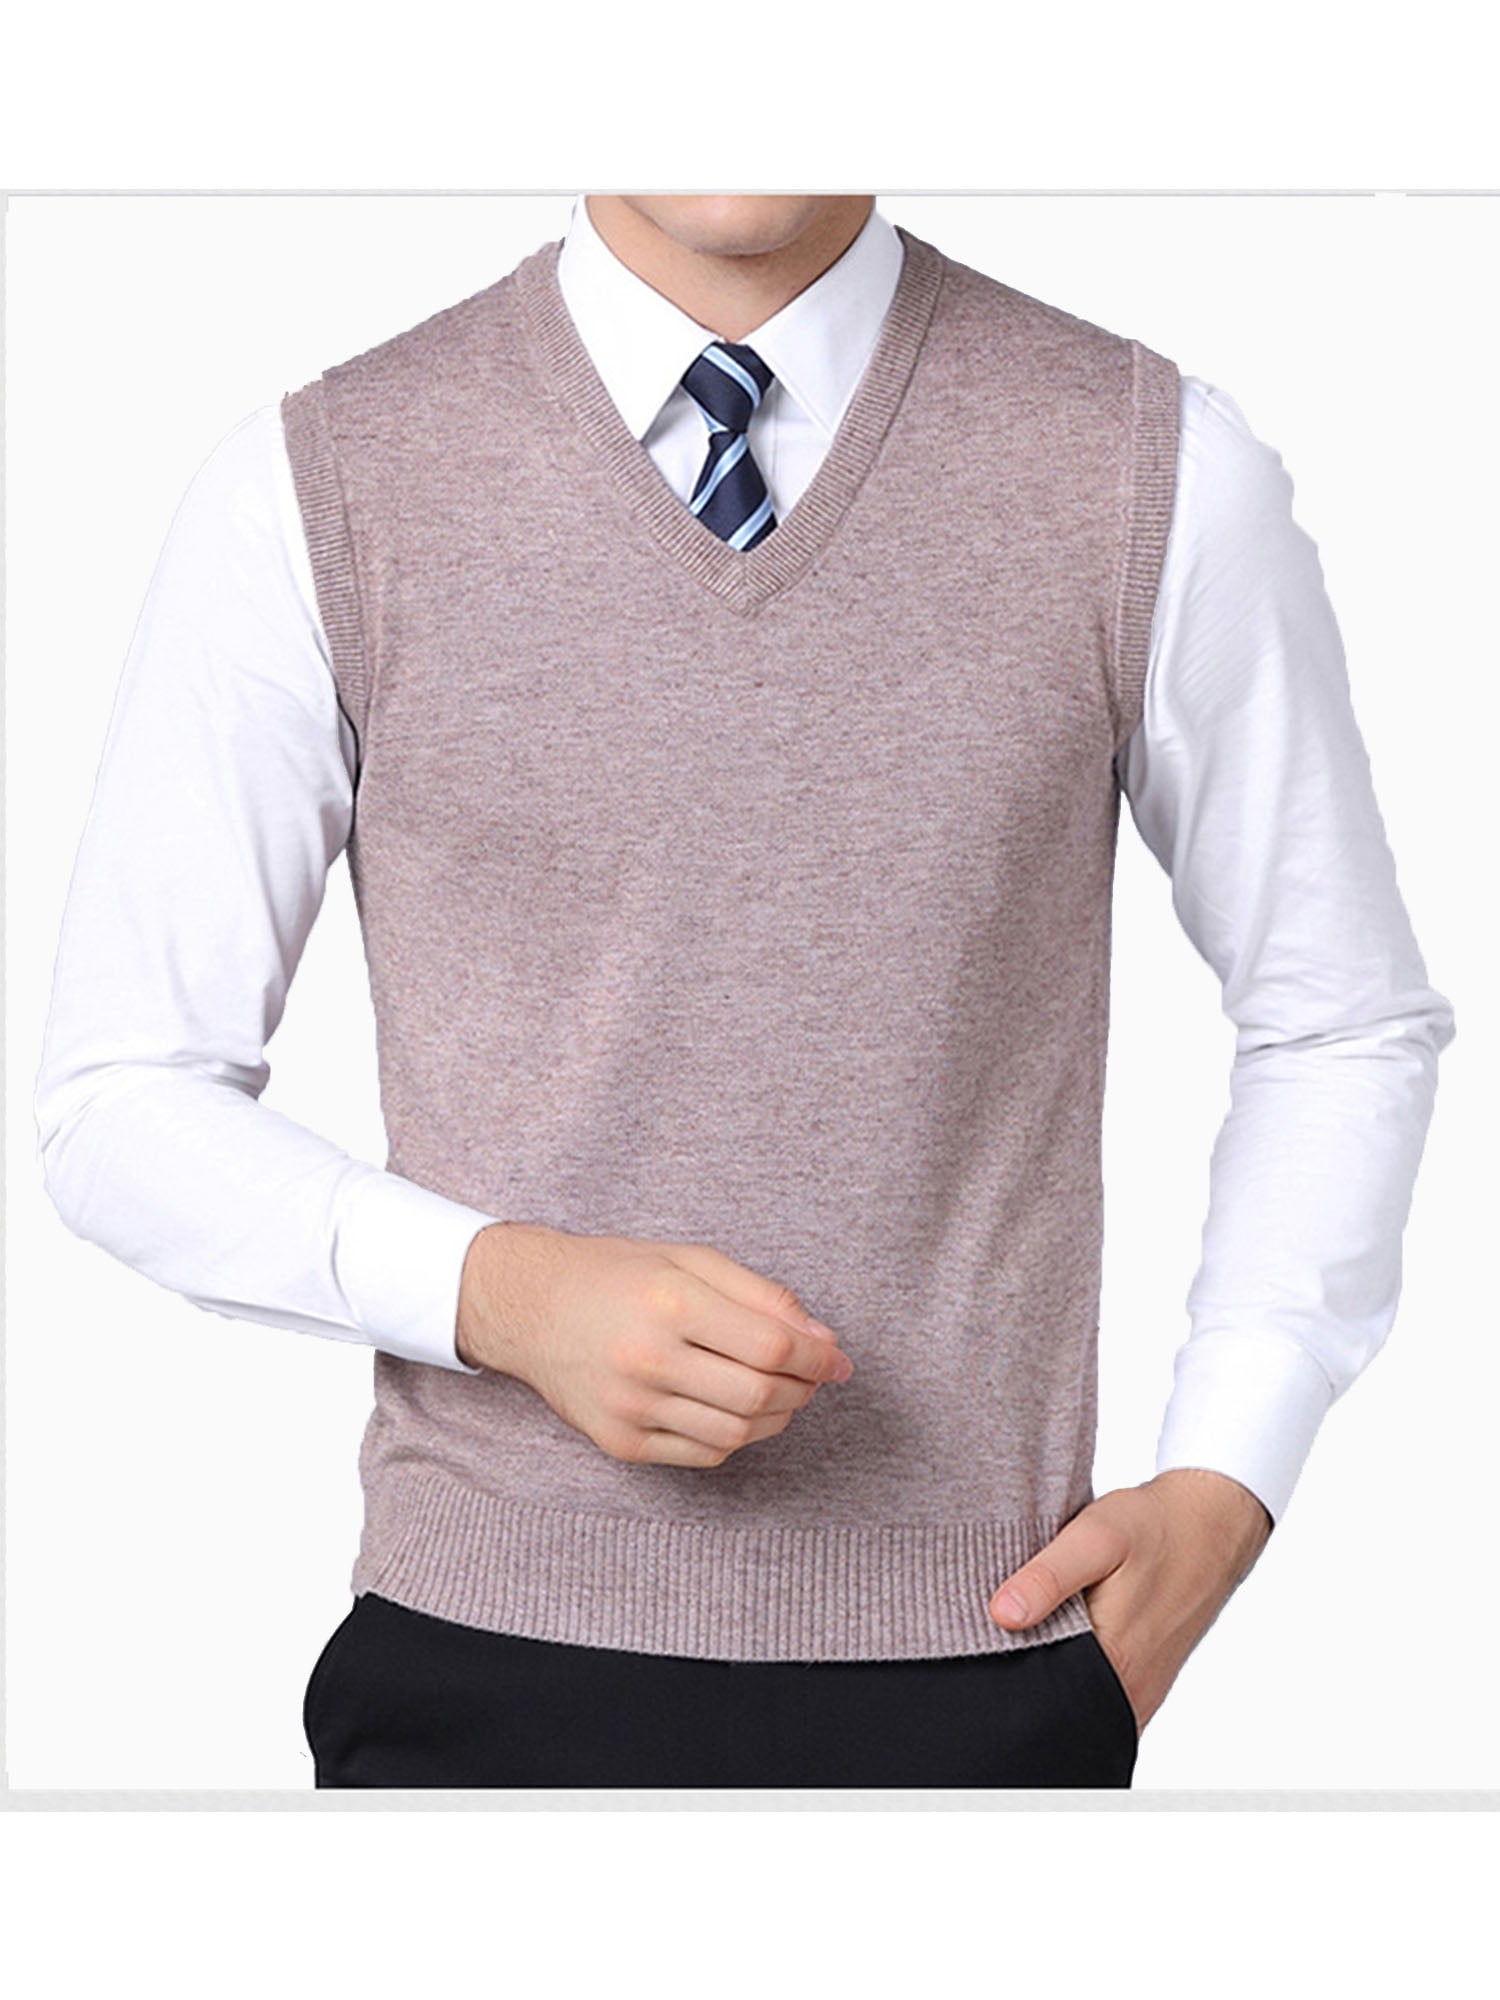 Classic Solid V Neck Sweater Vest for Men Casual Relax Fit Knit Sleeveless  Pullover Autumn Winter Business Golf Top - Walmart.com